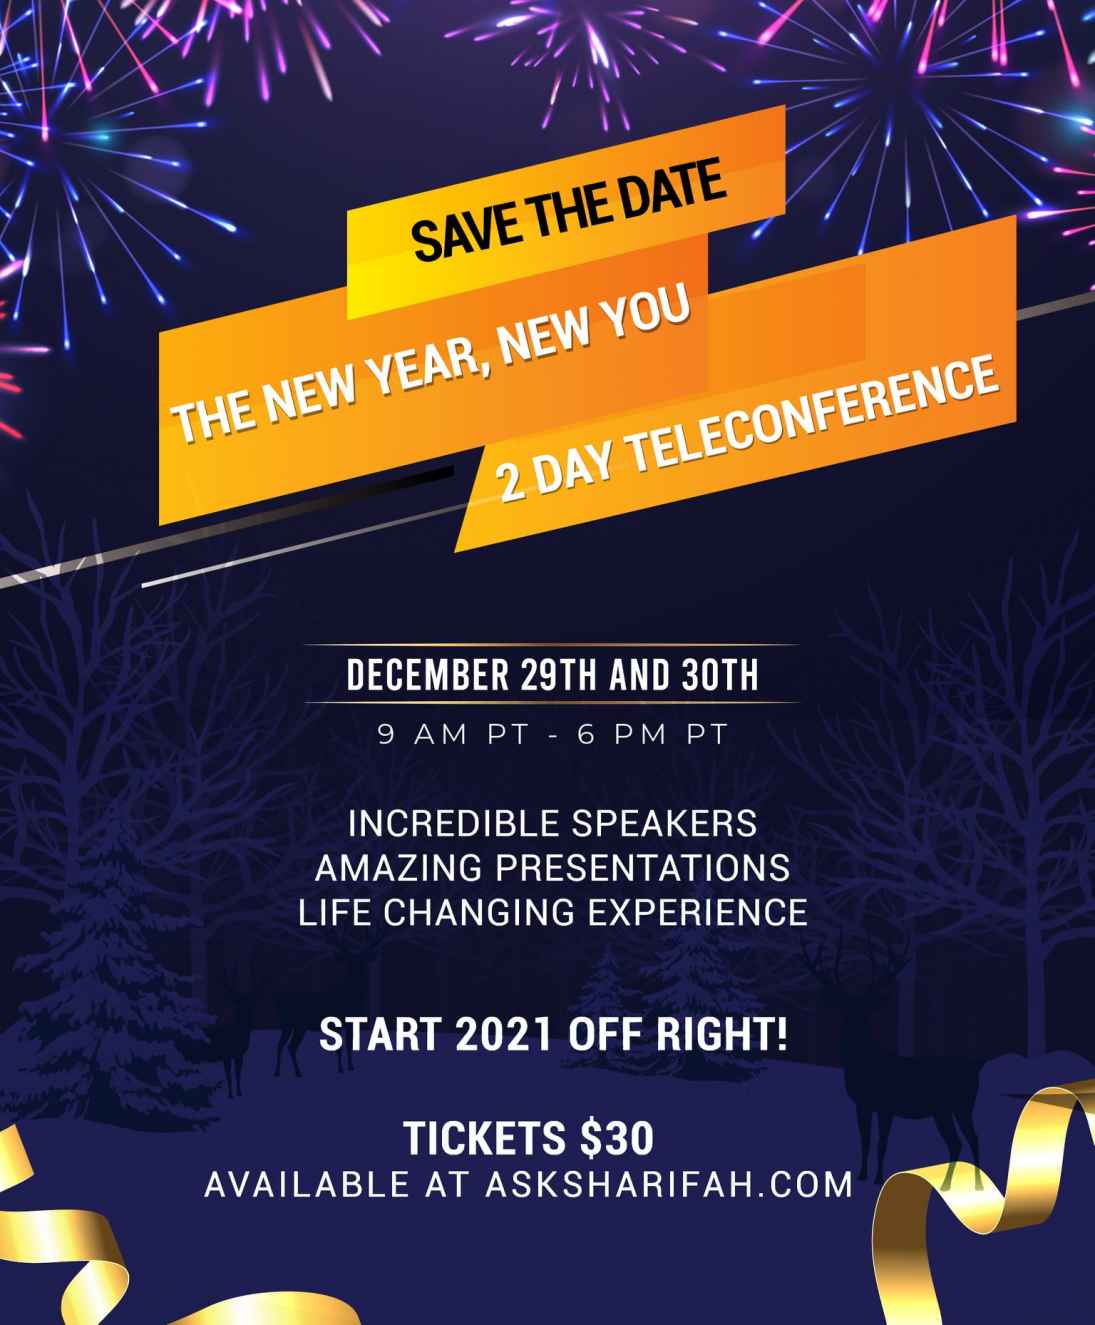 The New Year, New You 2 Day Teleconference